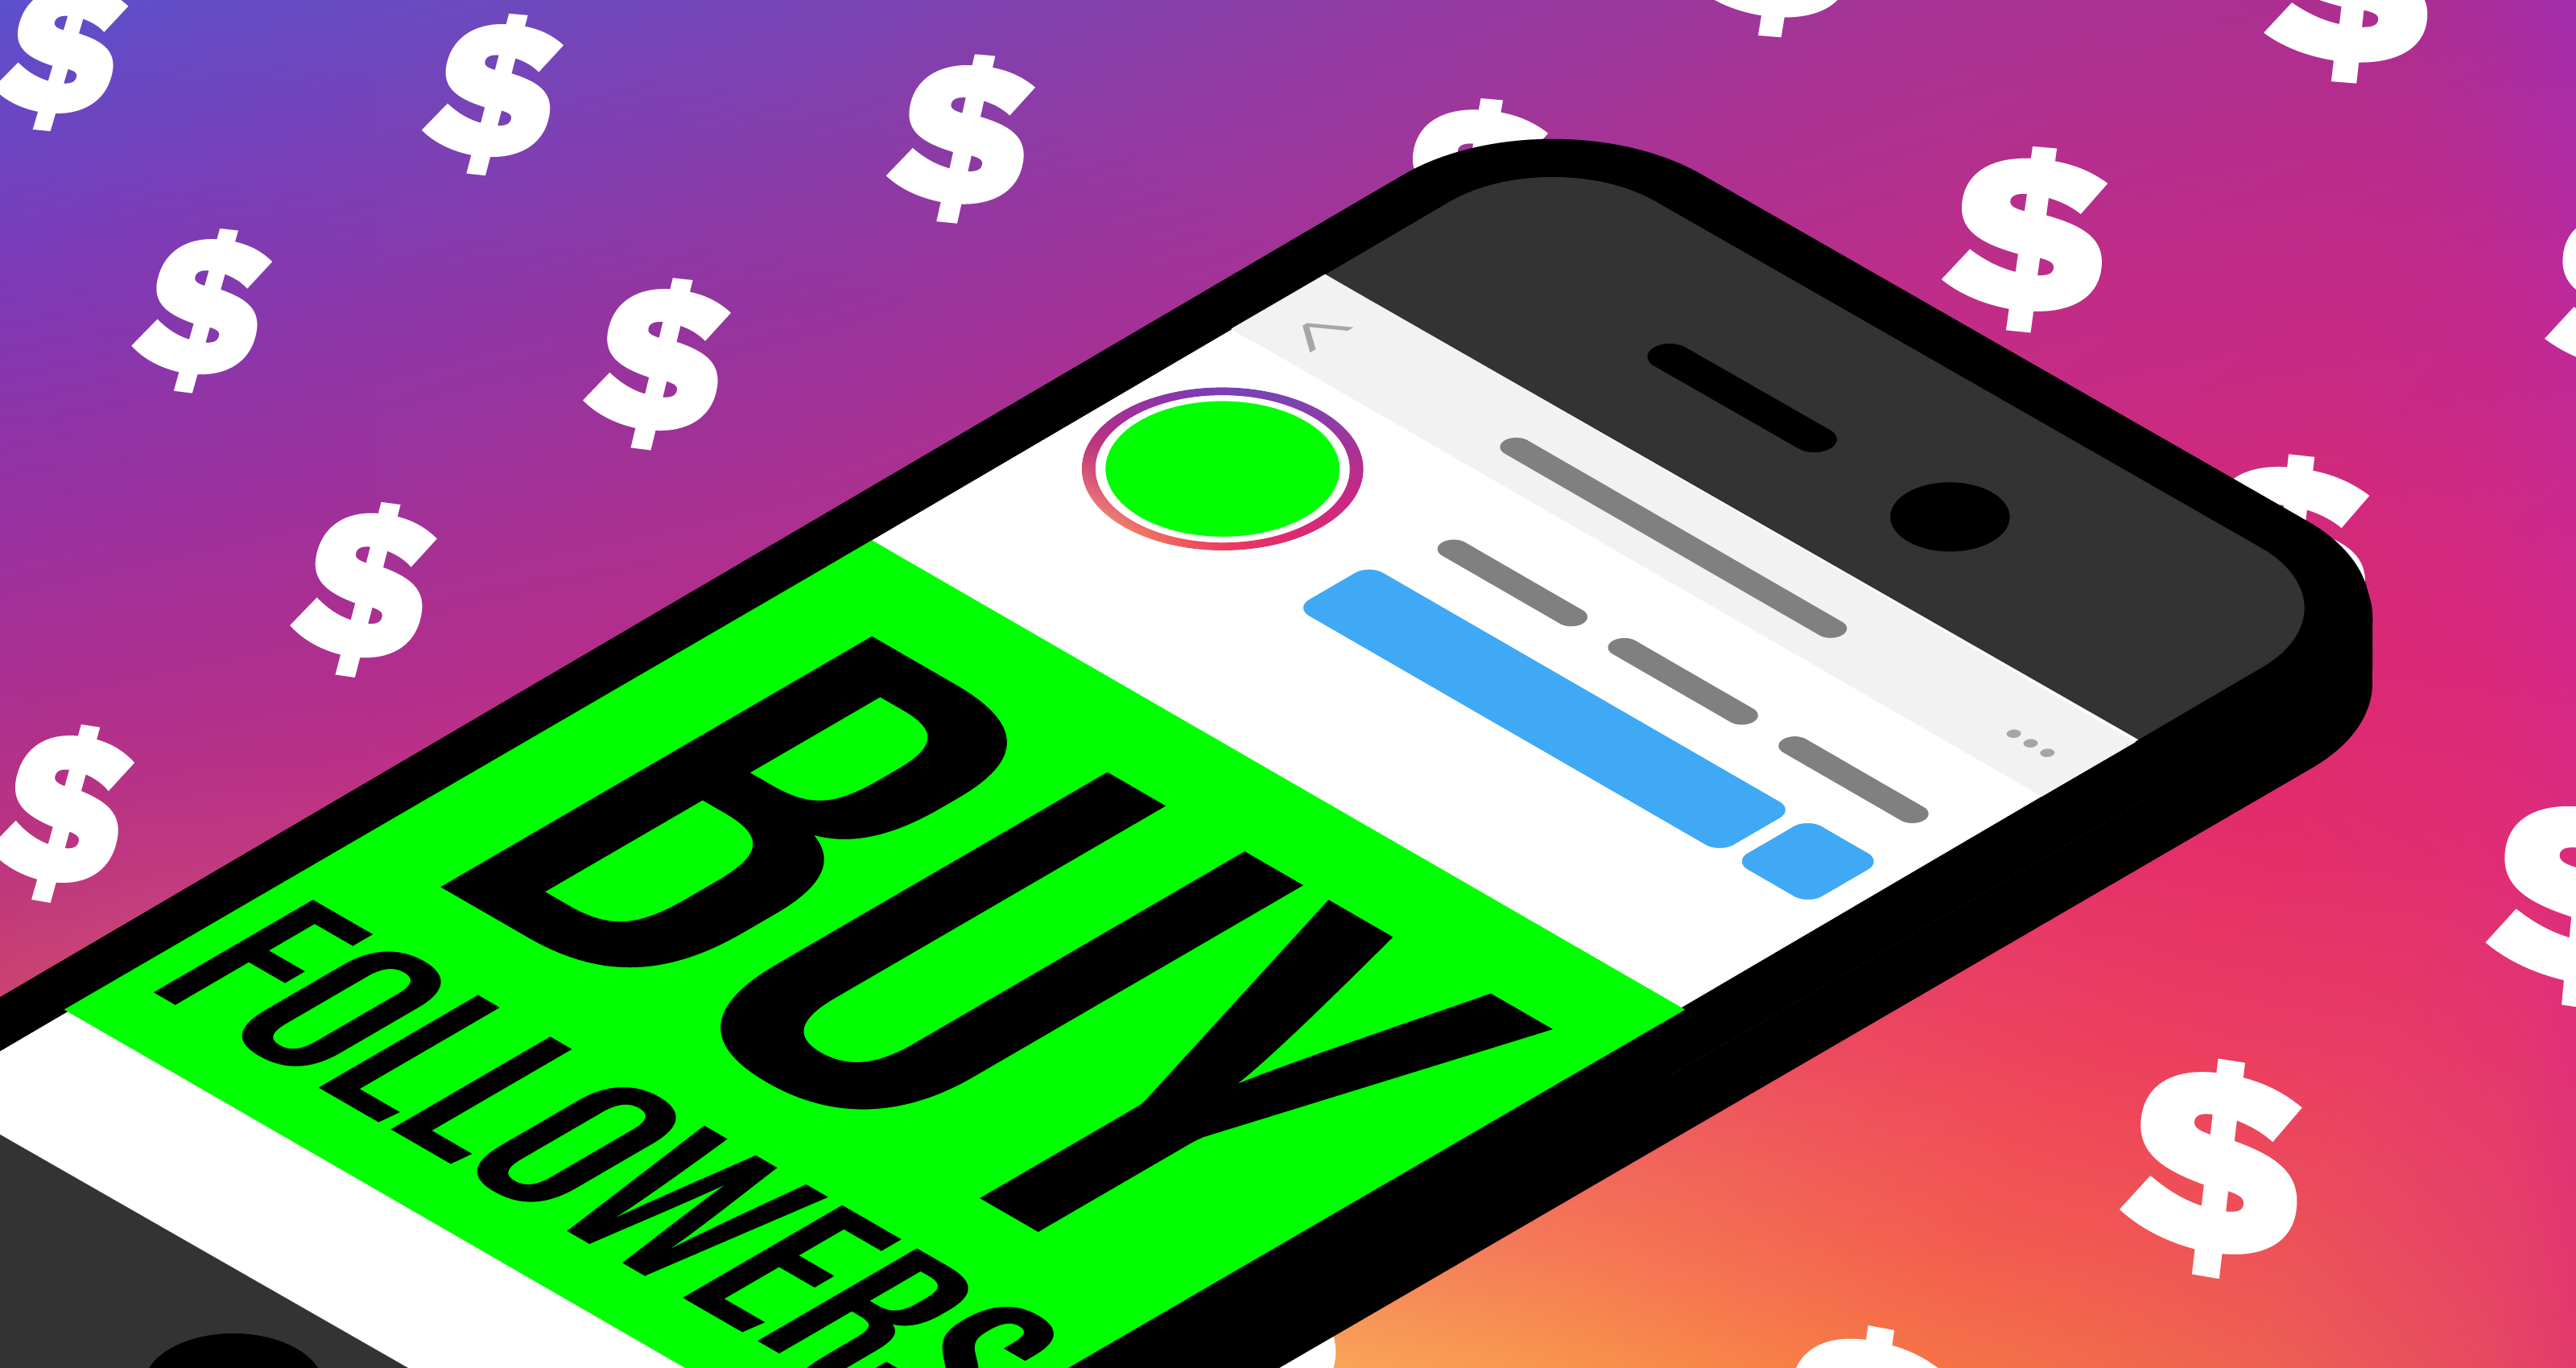 Buy  instagram followers will not take much time and is very easy